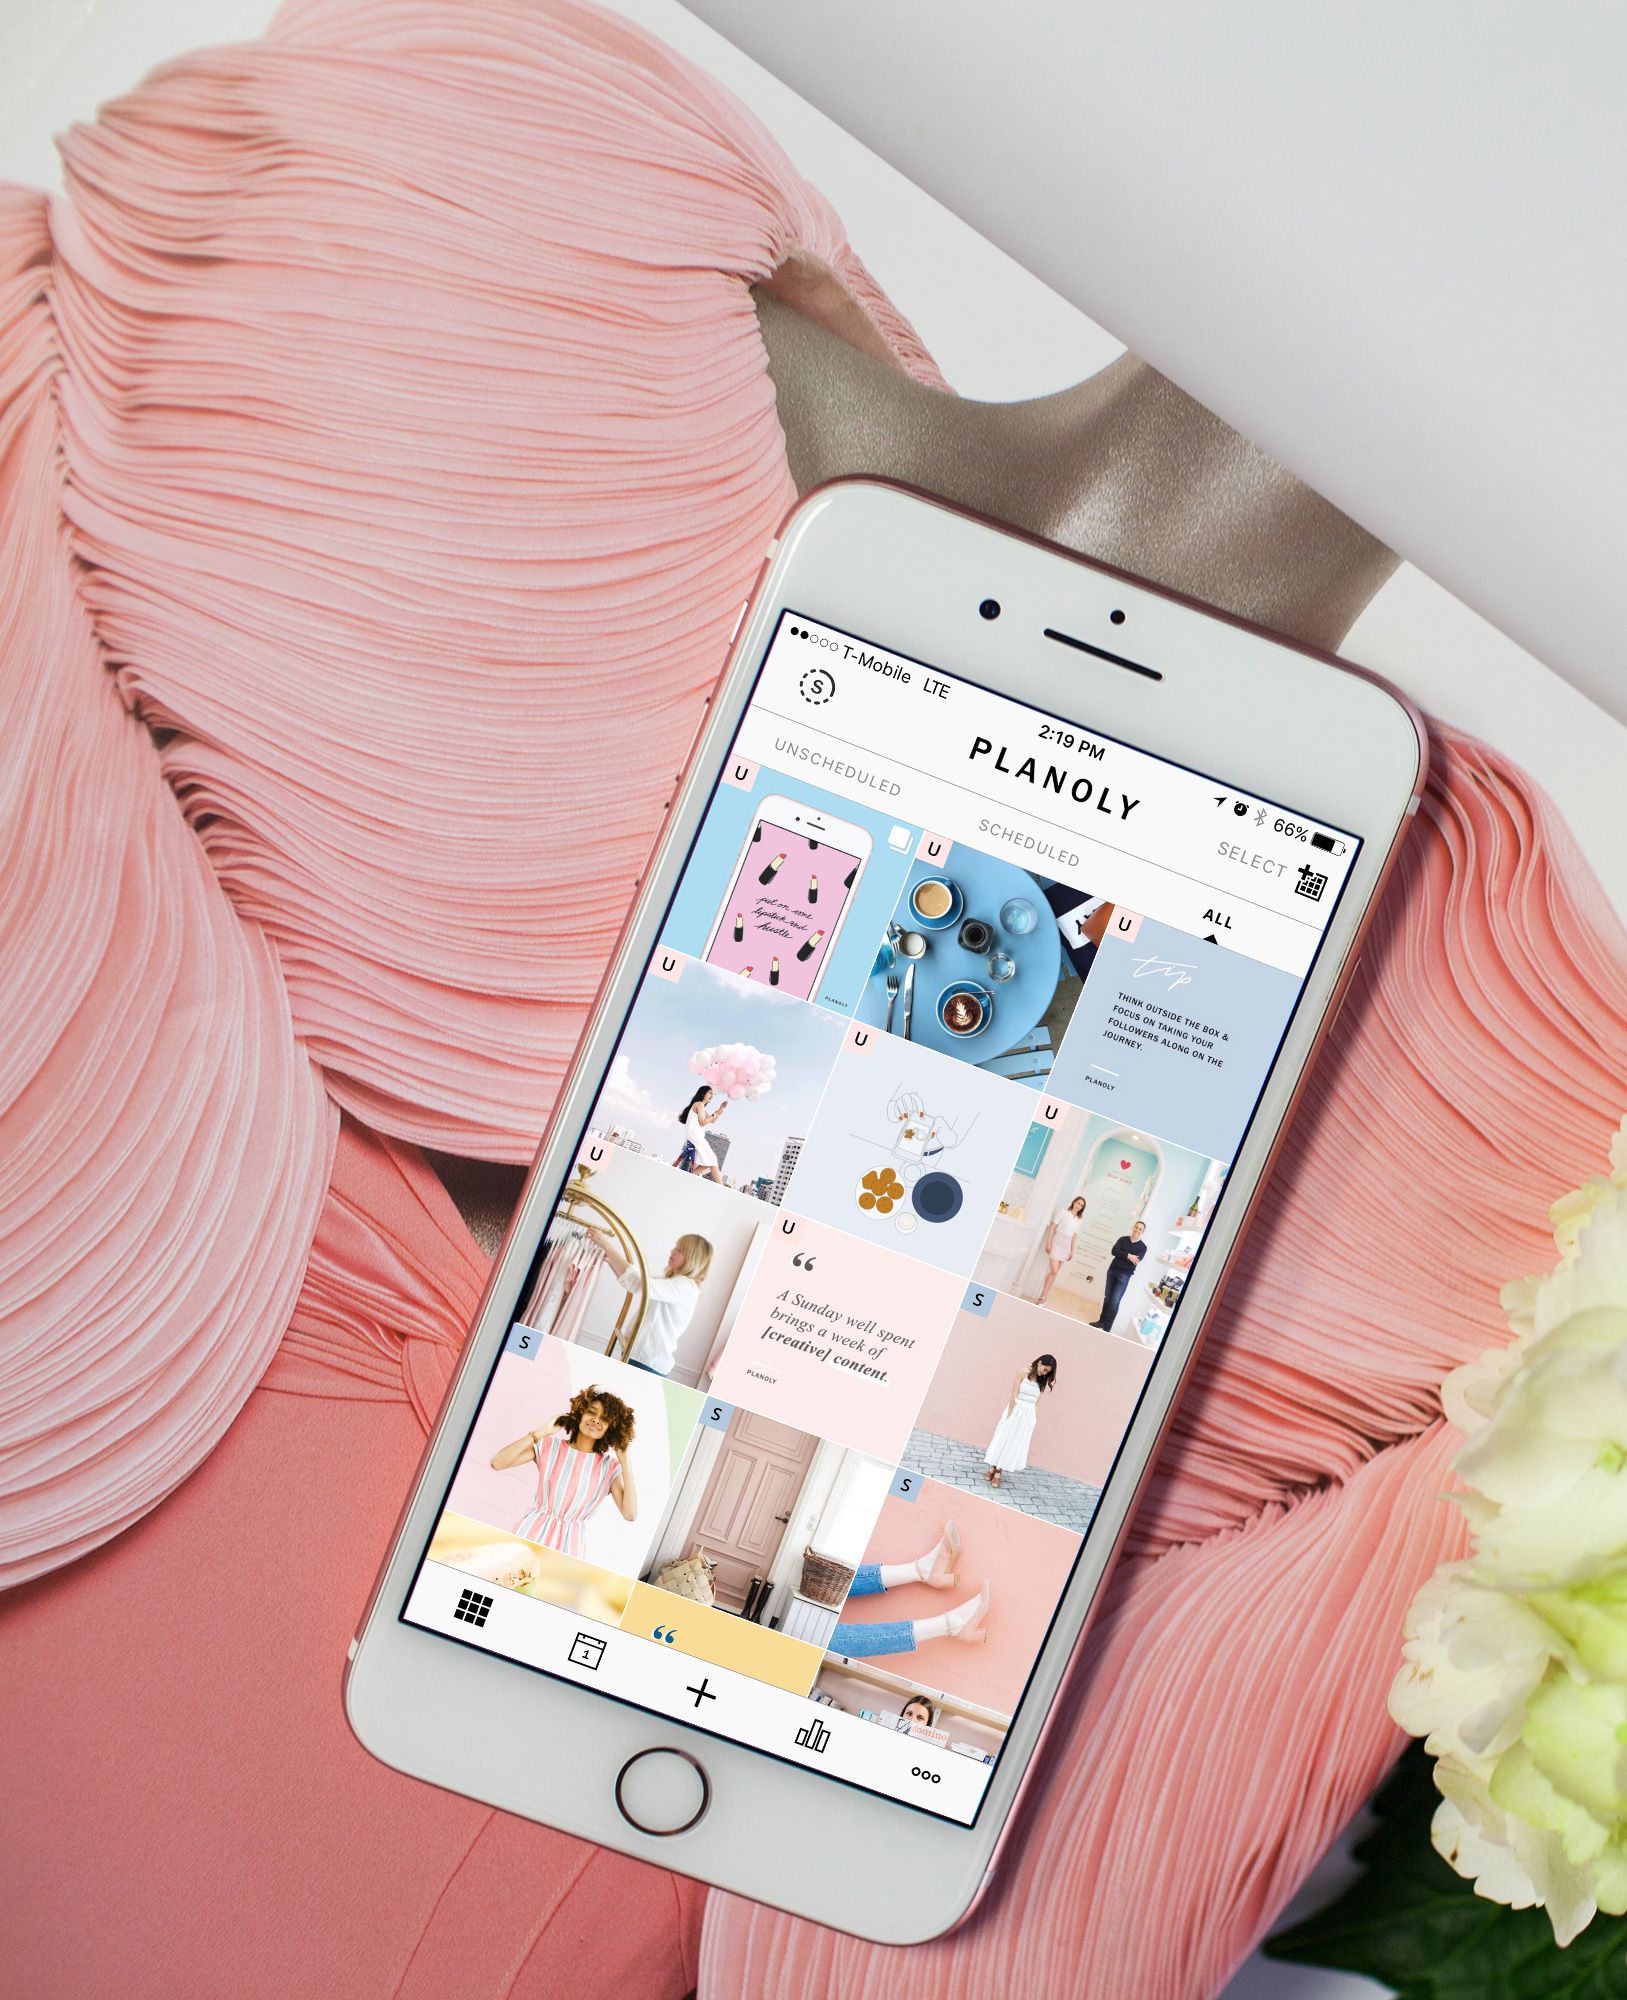 How to Create an Amazing Client Experience on Instagram - PLANOLY Blog 8